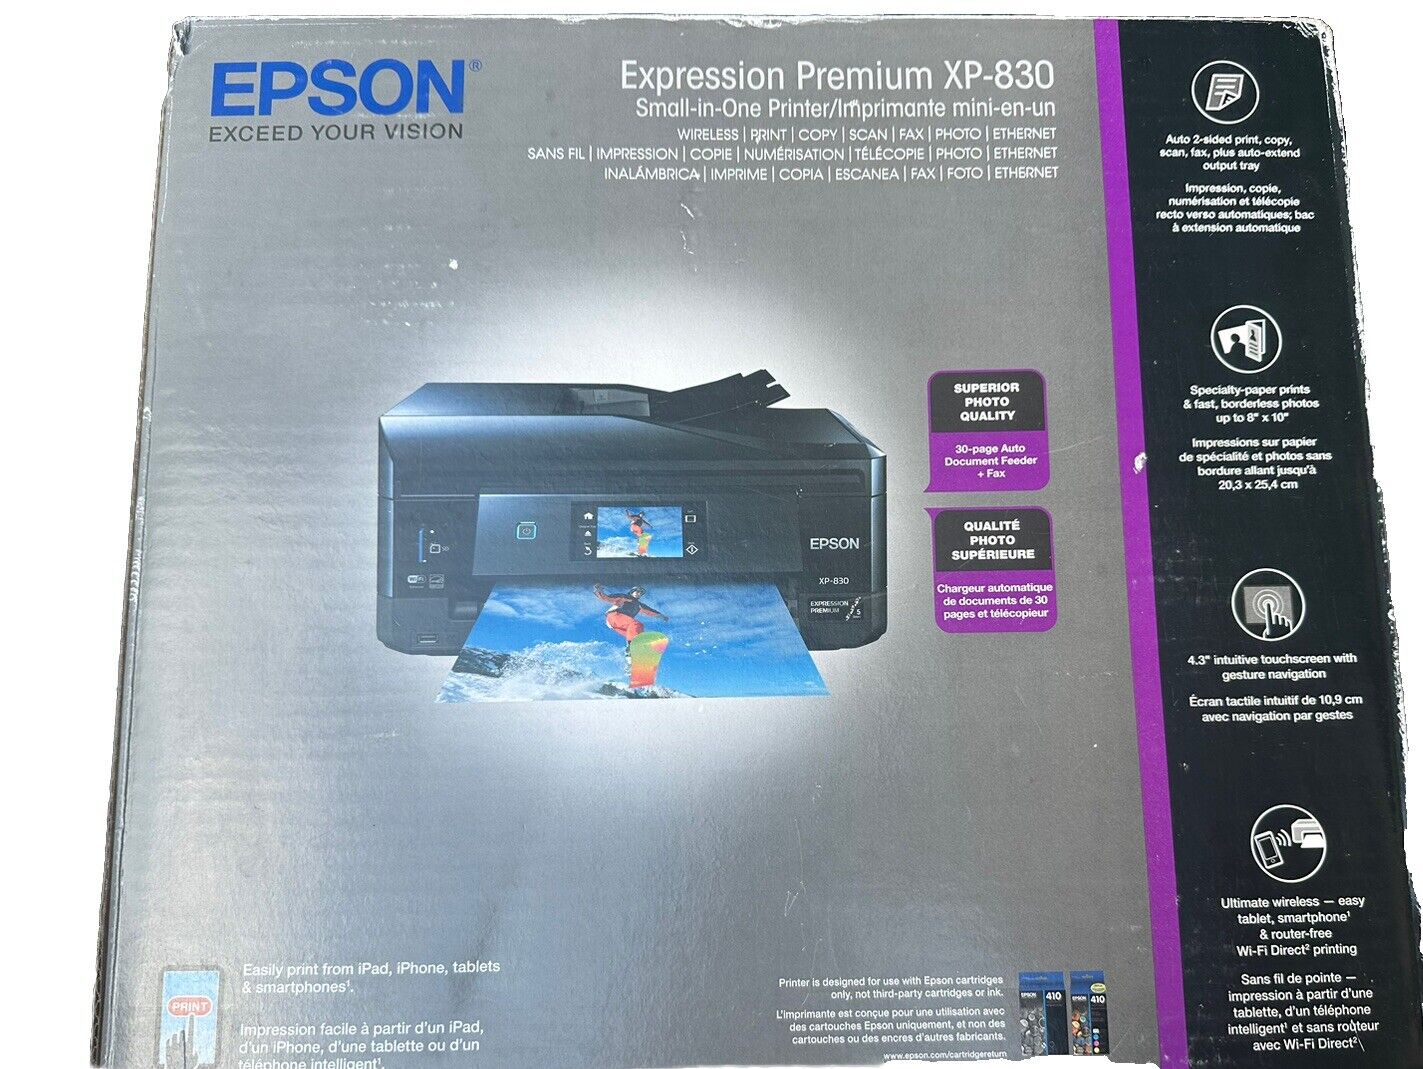 Epson Expression Premium XP-830 All-in-One Deluxe Print Scan Fax WiFi Photos